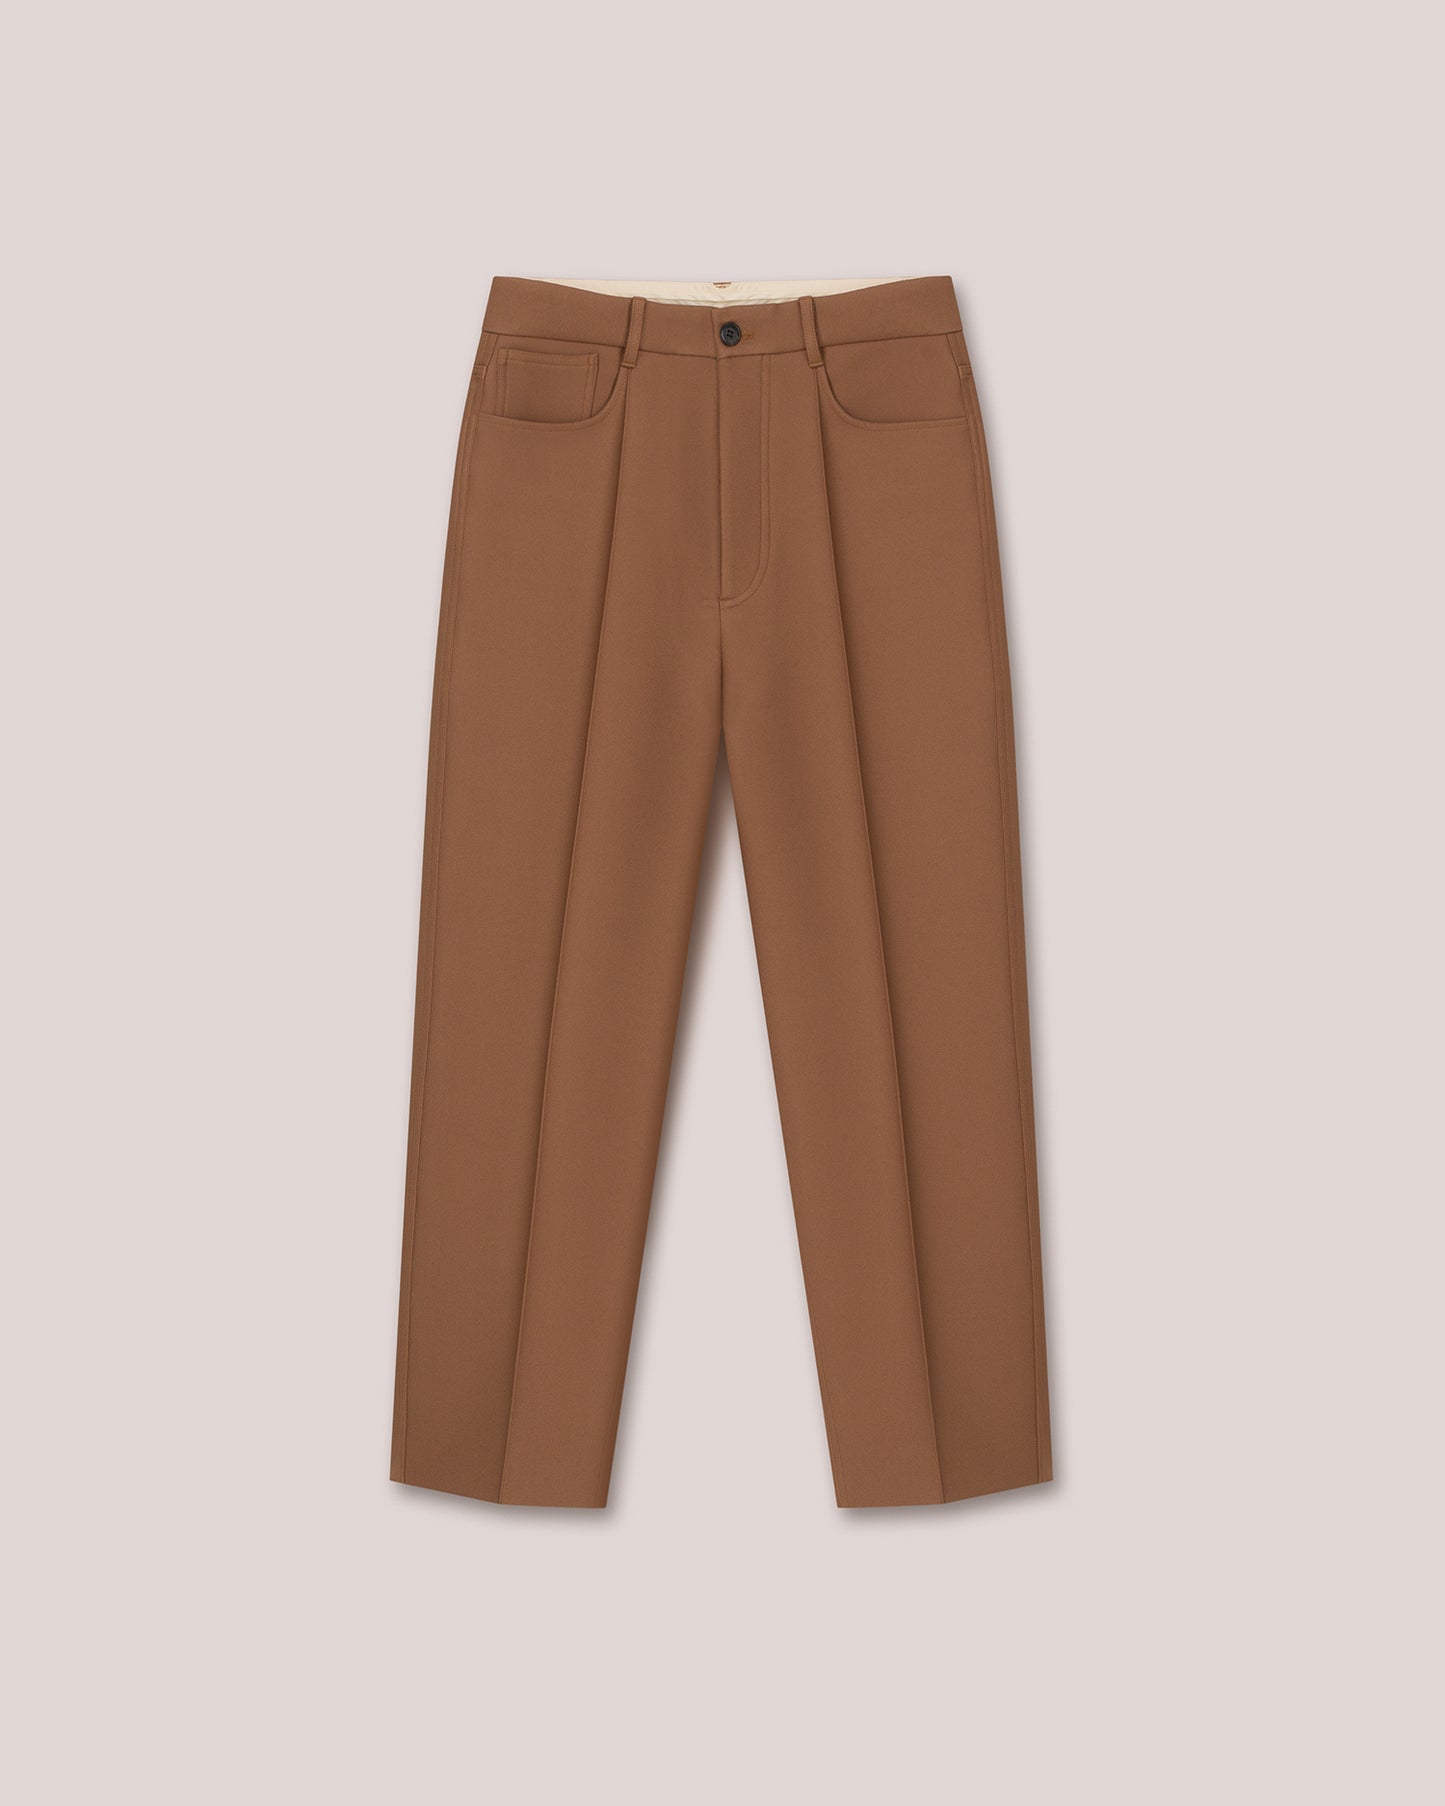 Jett - Double Suiting Pants - Nut Brown